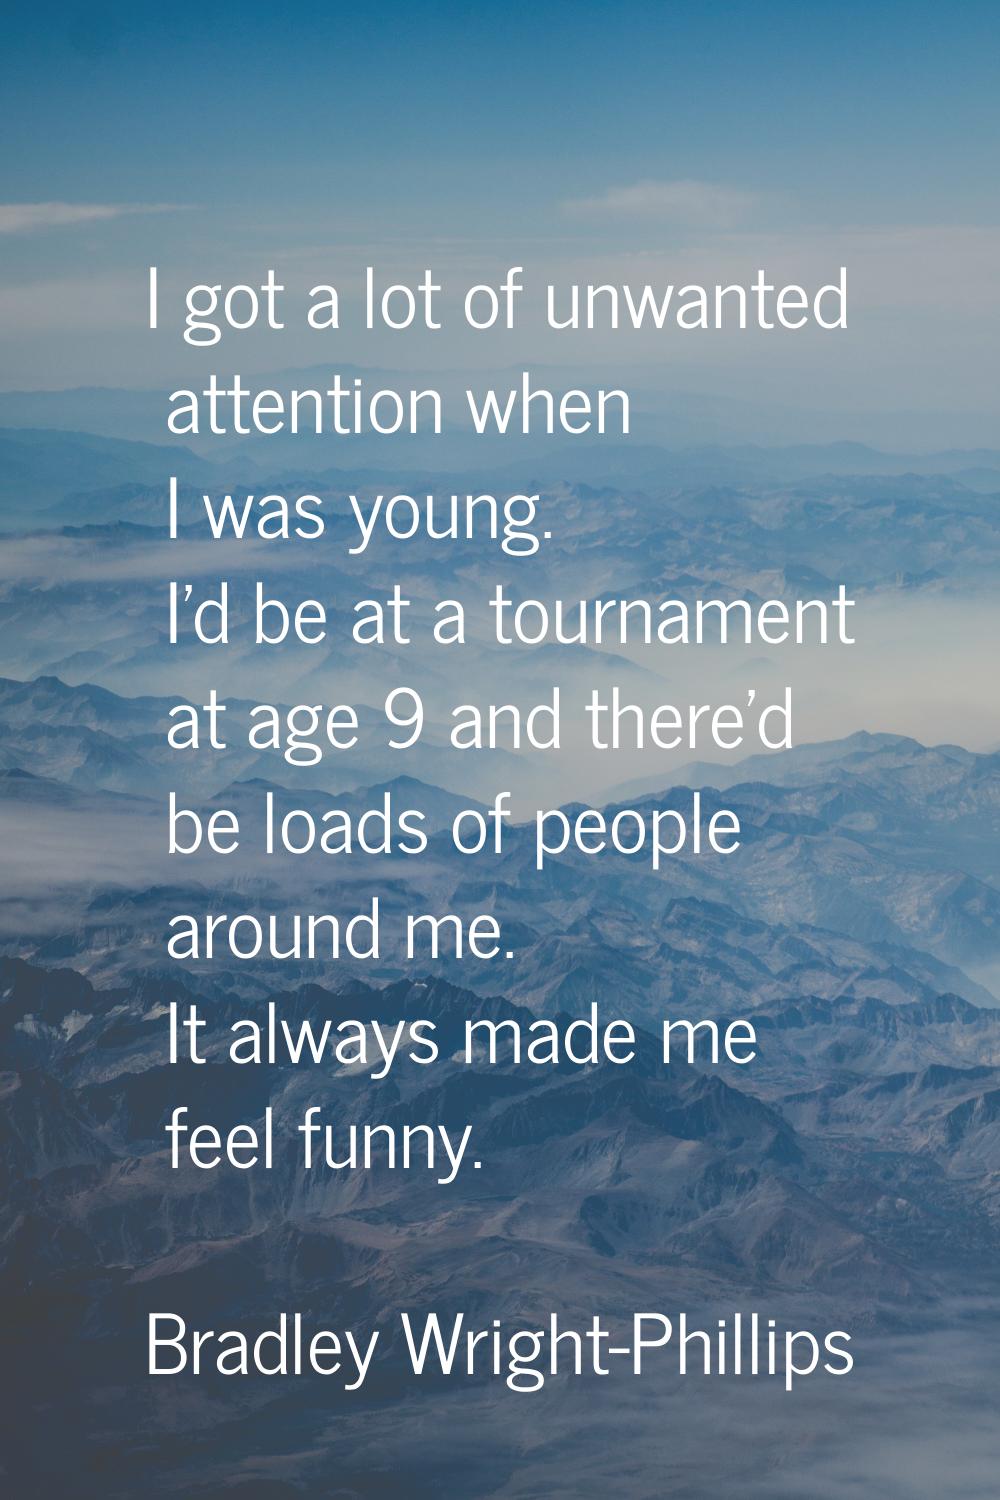 I got a lot of unwanted attention when I was young. I'd be at a tournament at age 9 and there'd be 